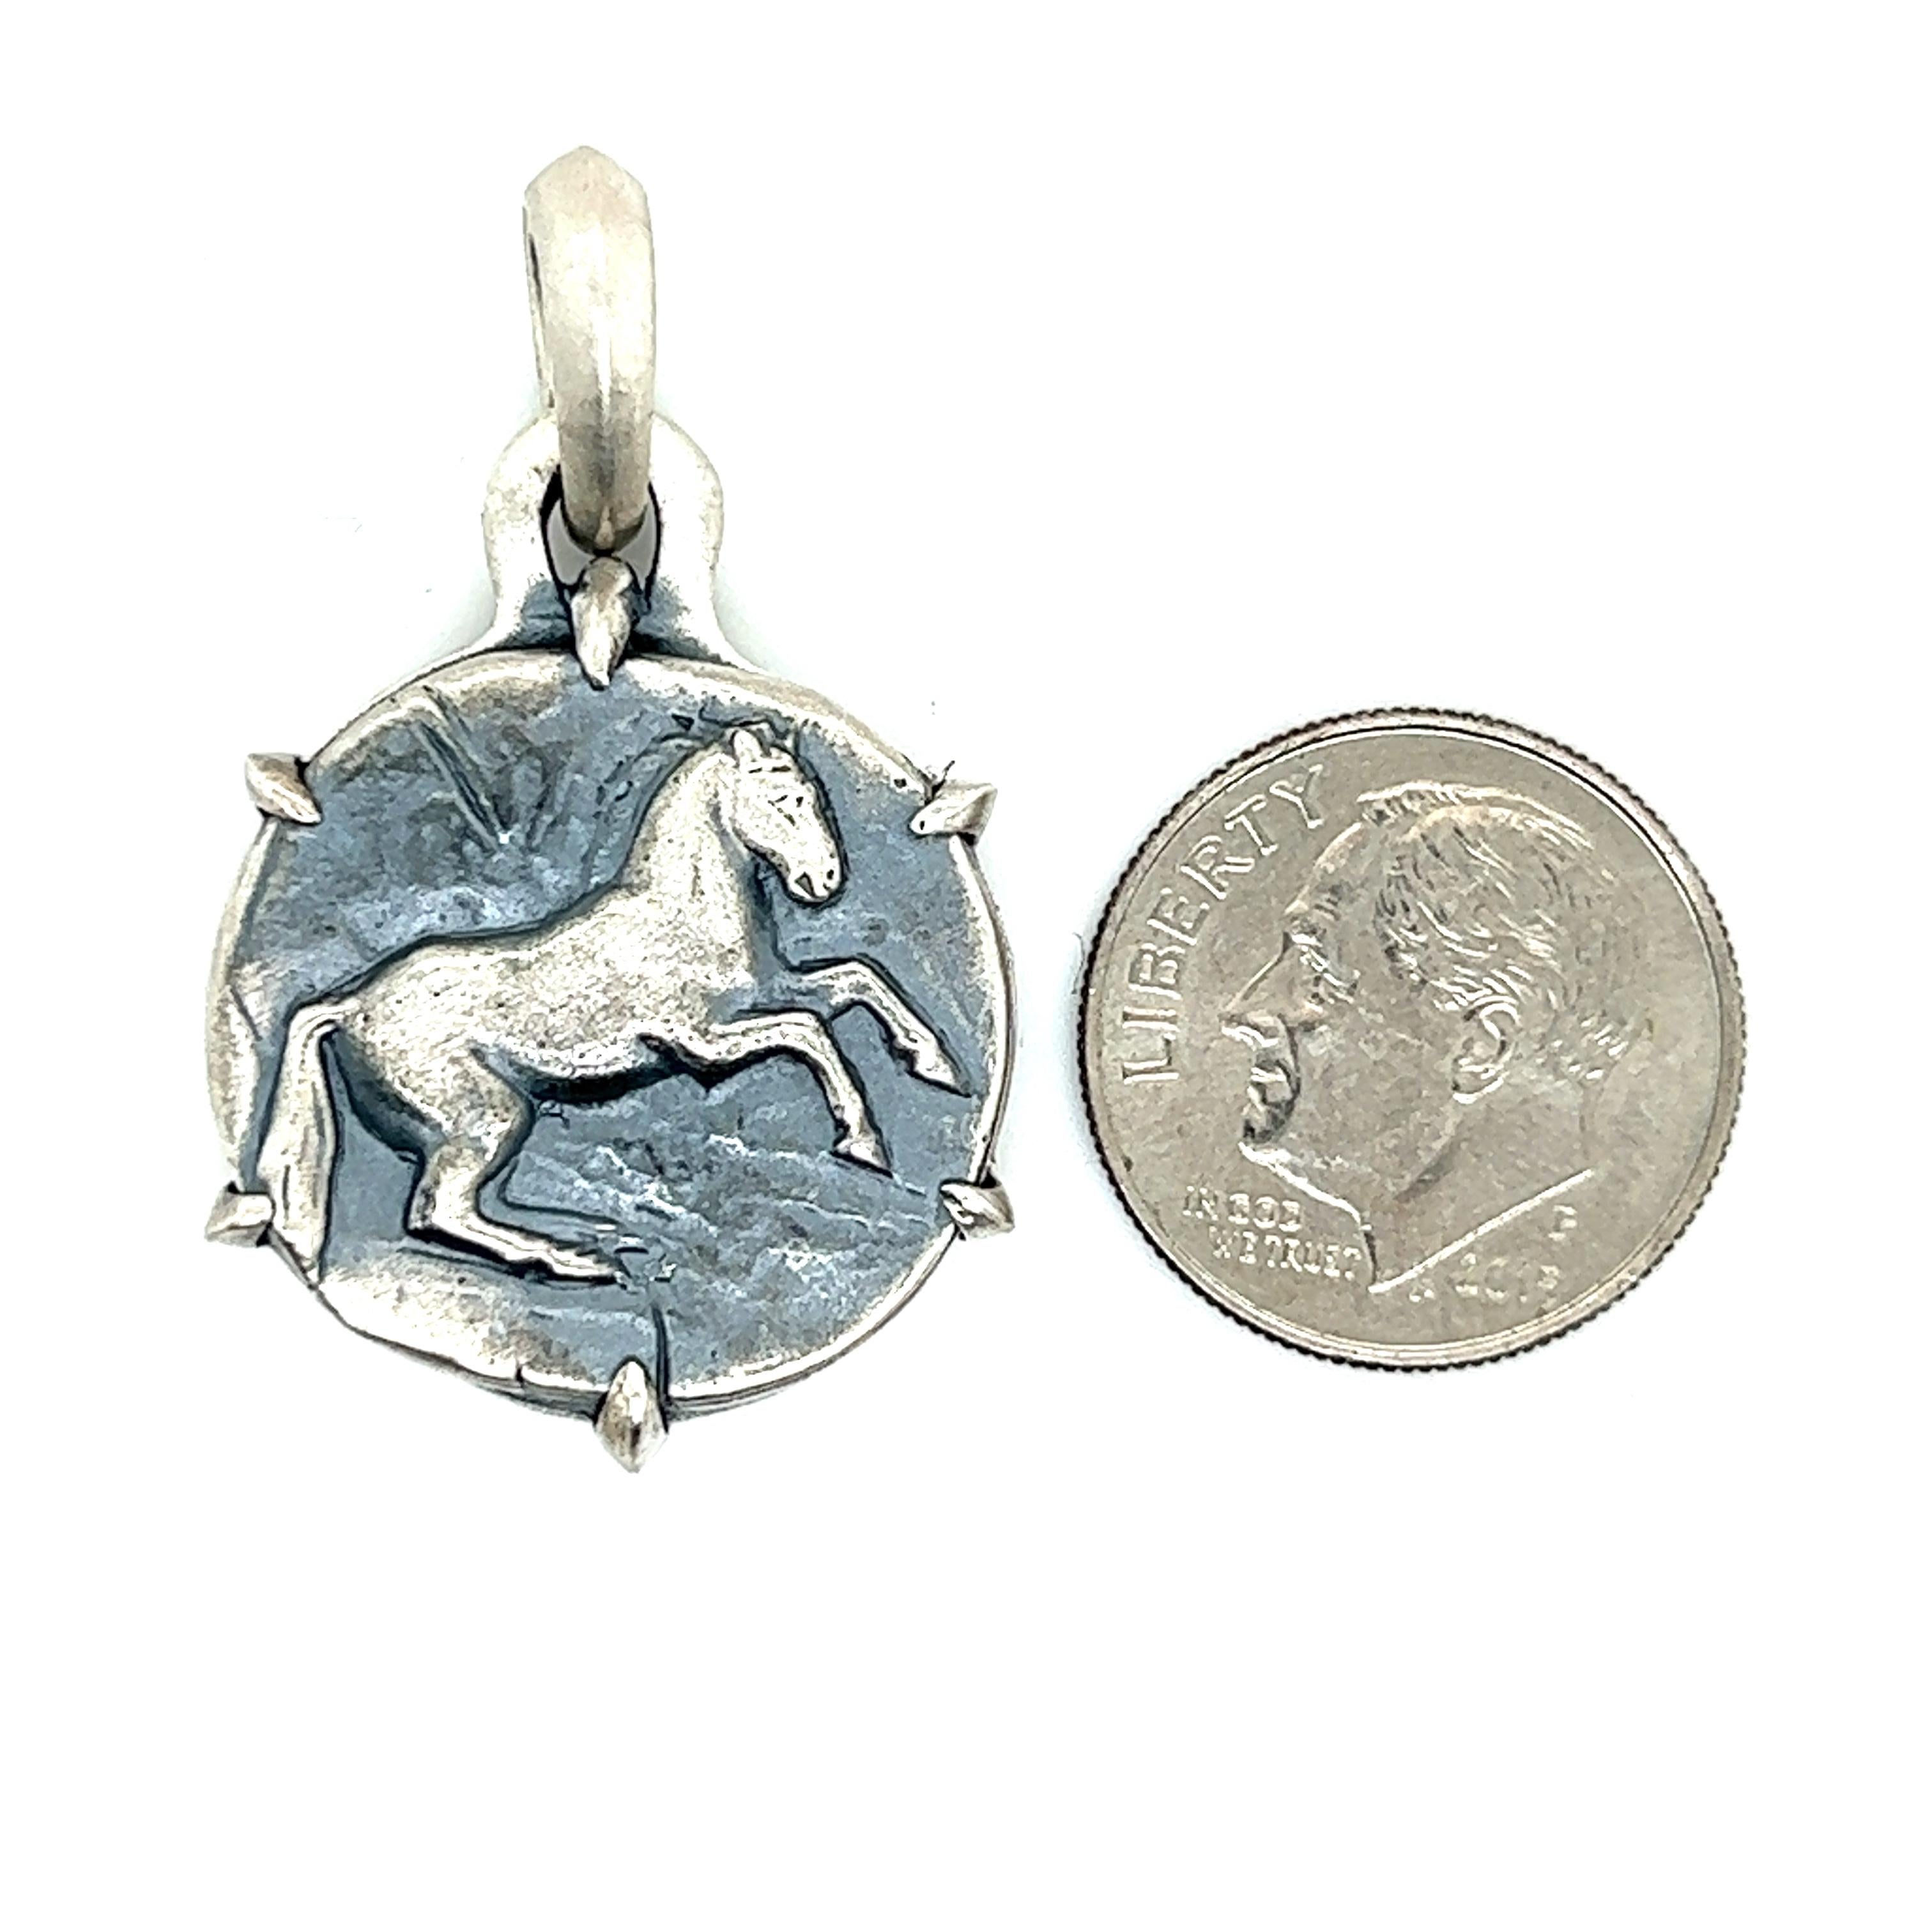 Authentic David Yurman Estate Petrus Horse Amulet Silver DY252

Retails $495.00

TRUSTED SELLER SINCE 2002

PLEASE SEE OUR HUNDREDS OF POSITIVE FEEDBACKS FROM OUR CLIENTS!!

FREE SHIPPING

This elegant Authentic David Yurman Men's sterling silver